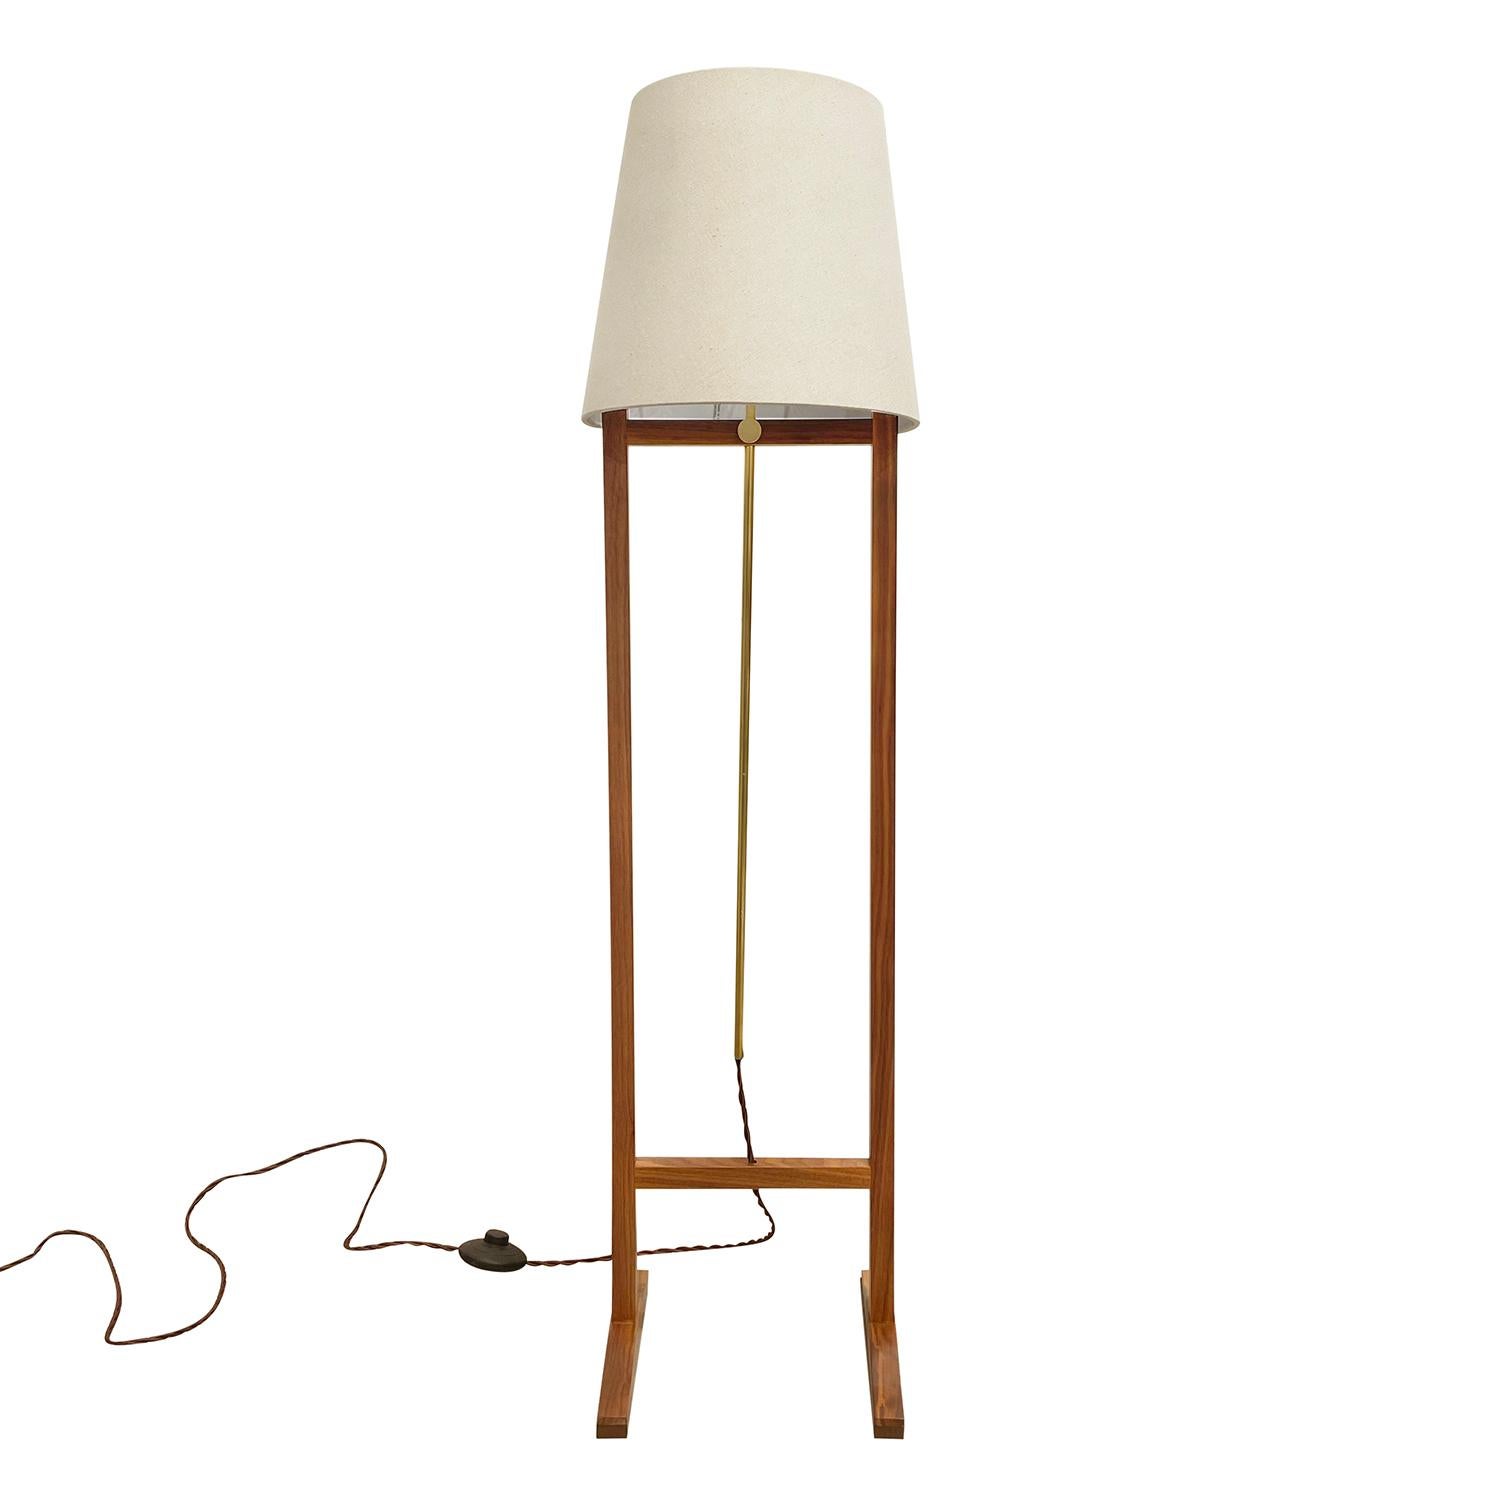 A light-brown, vintage Mid-Century Modern Swedish adjustable floor lamp with a new beige round shade, made of handcrafted Walnut, designed by Josef Frank and produced by Svenskt Tenn, in good condition. The height of the Scandinavian light is